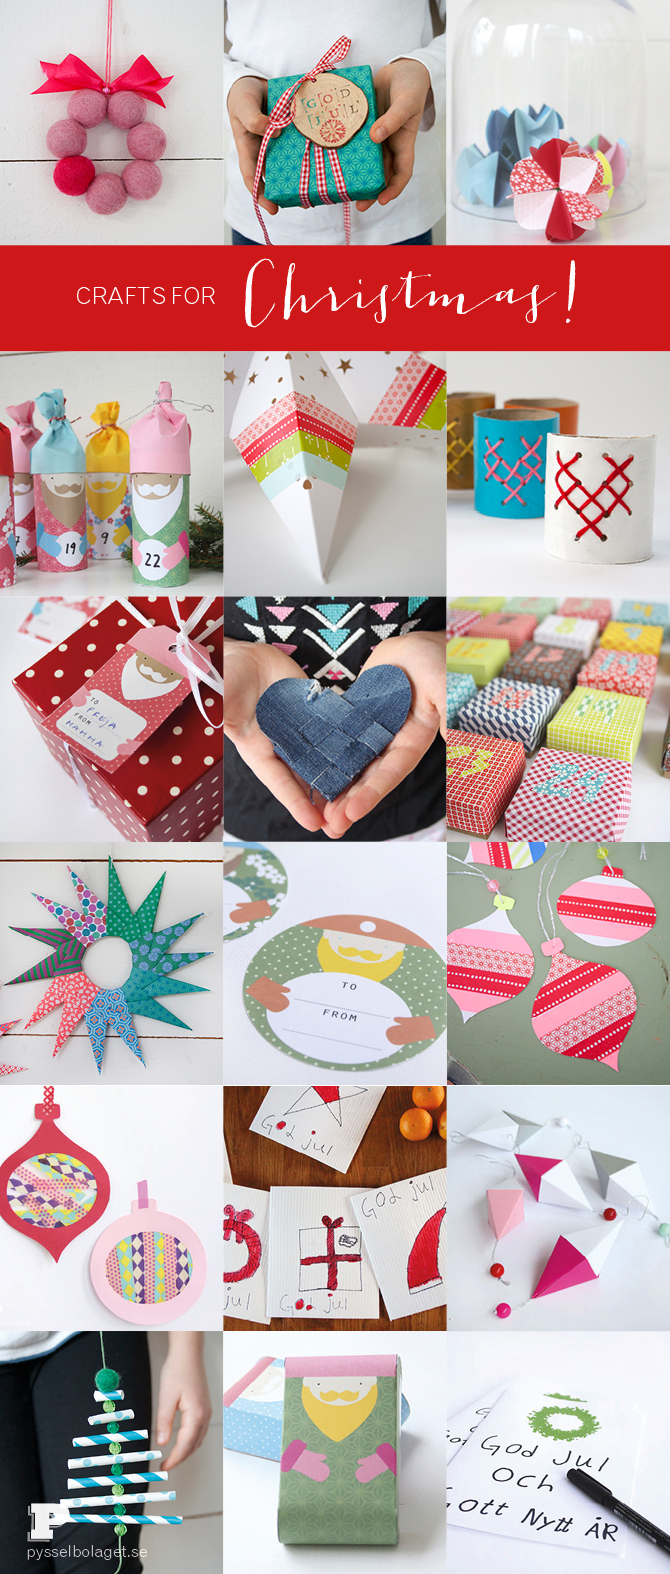 Crafts for Christmas 2015